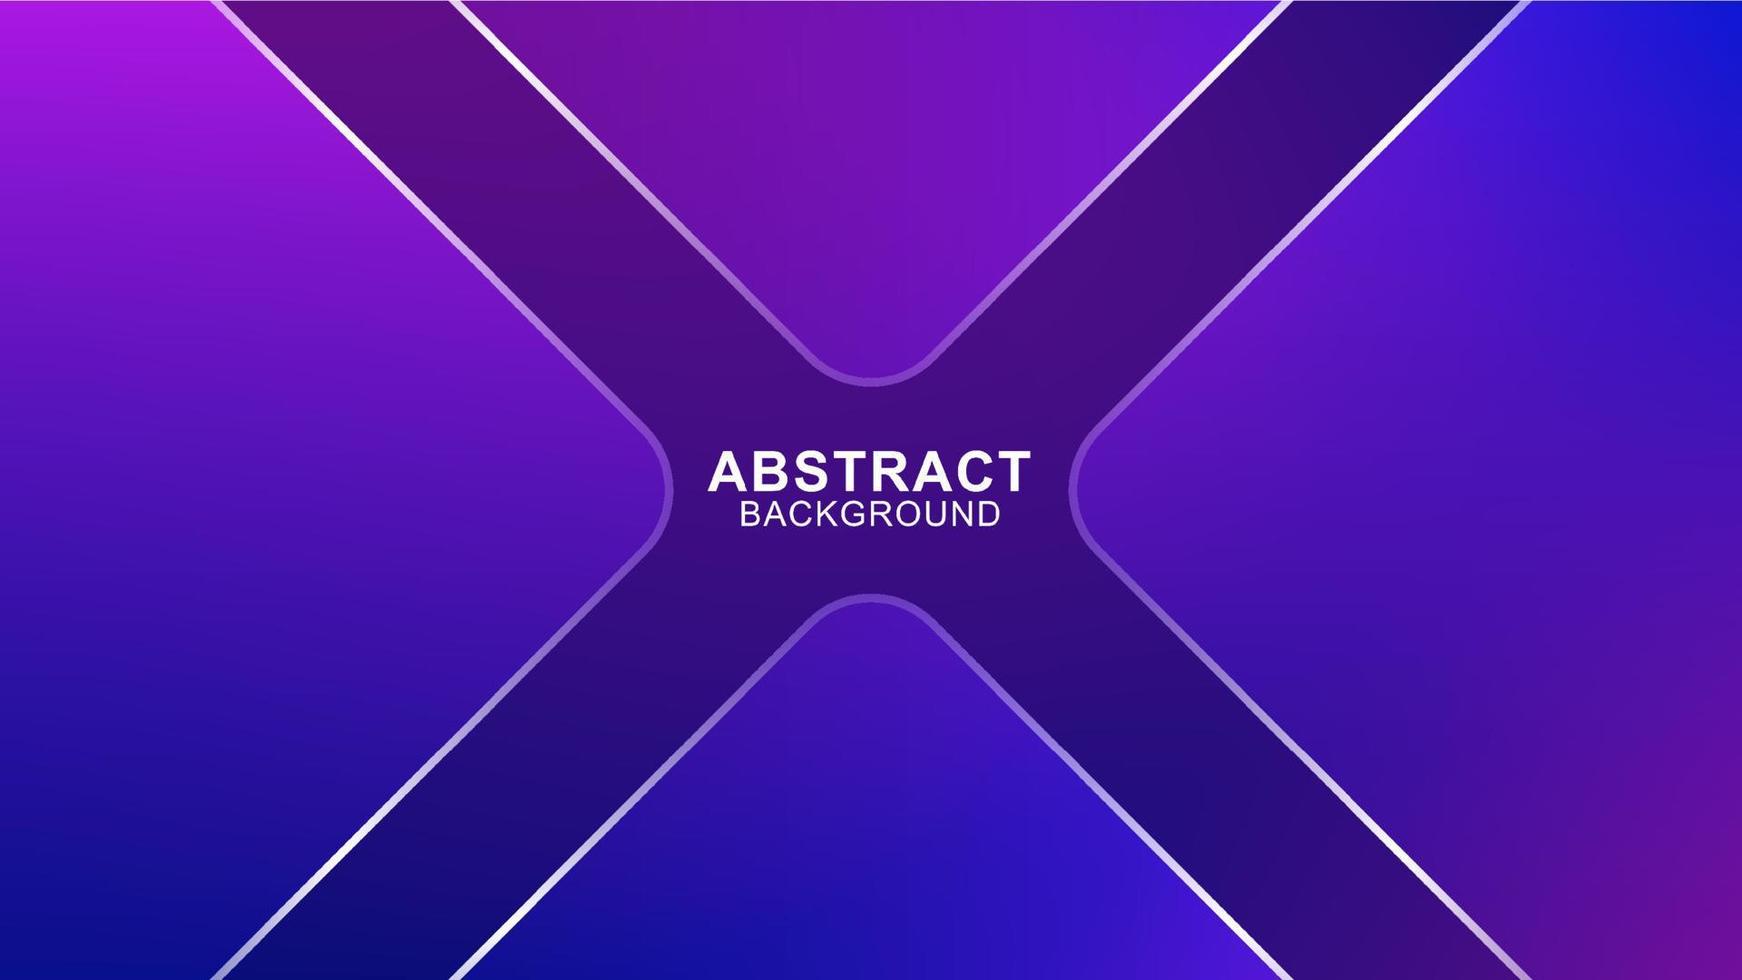 Modern abstract geometric shapes background vector